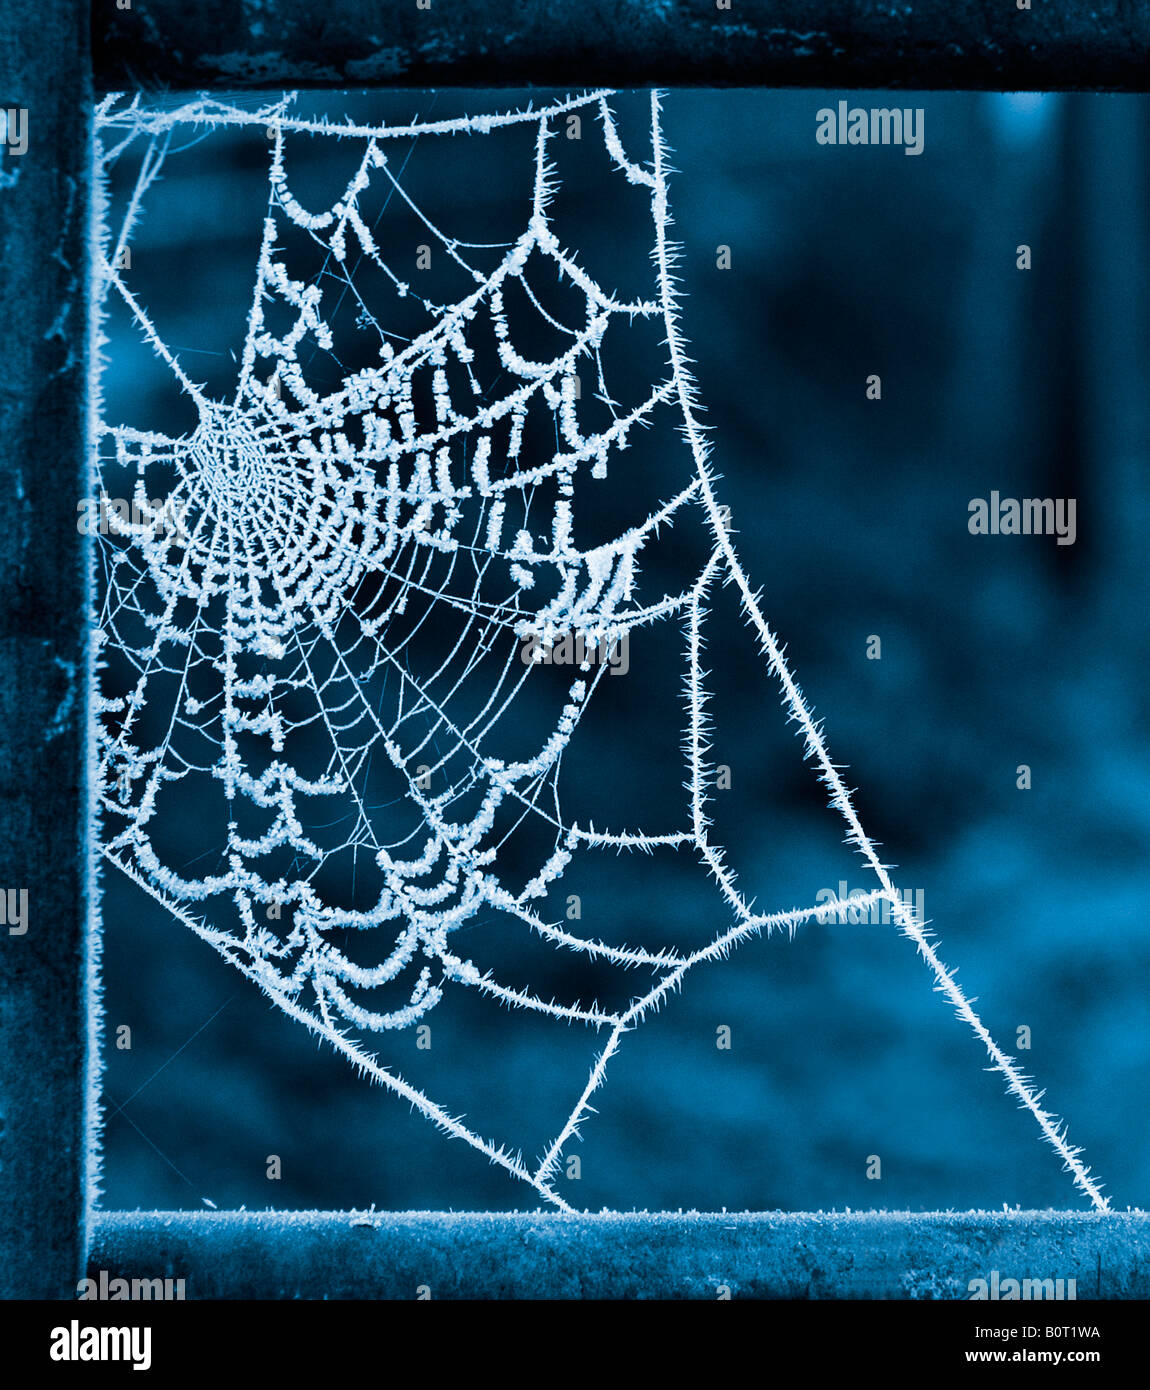 Frozen spiders web on a farm gate Stock Photo